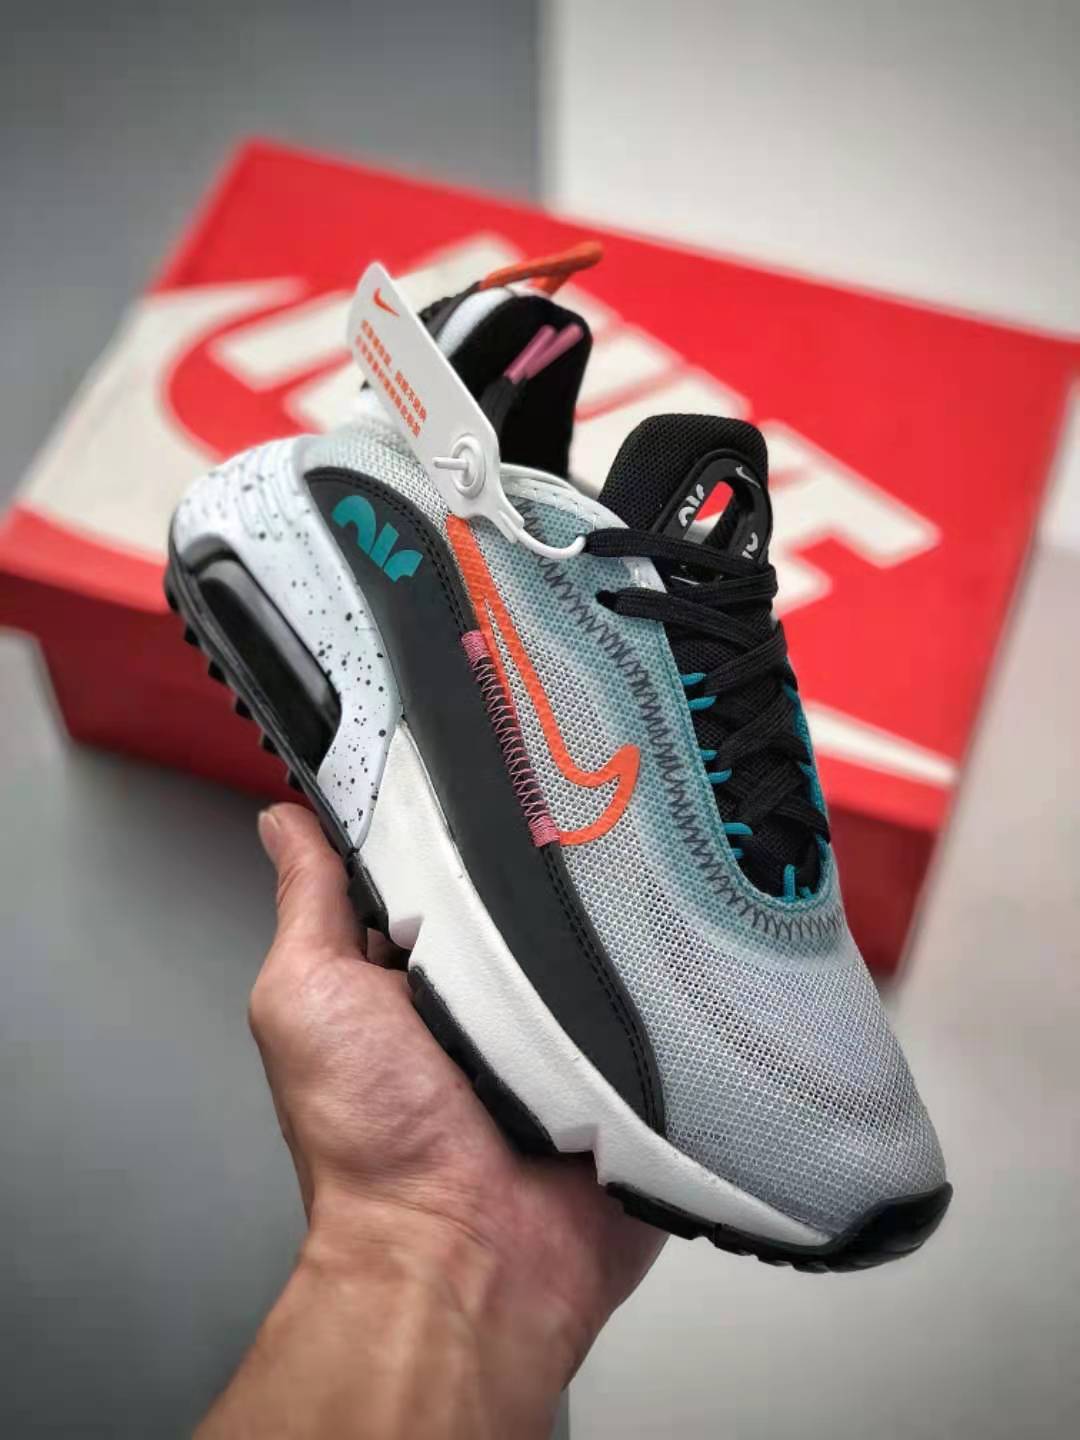 Nike Air Max 2090 'White Turf Orange Speckled' CZ1708-100 - Stylish and Vibrant Footwear from Nike